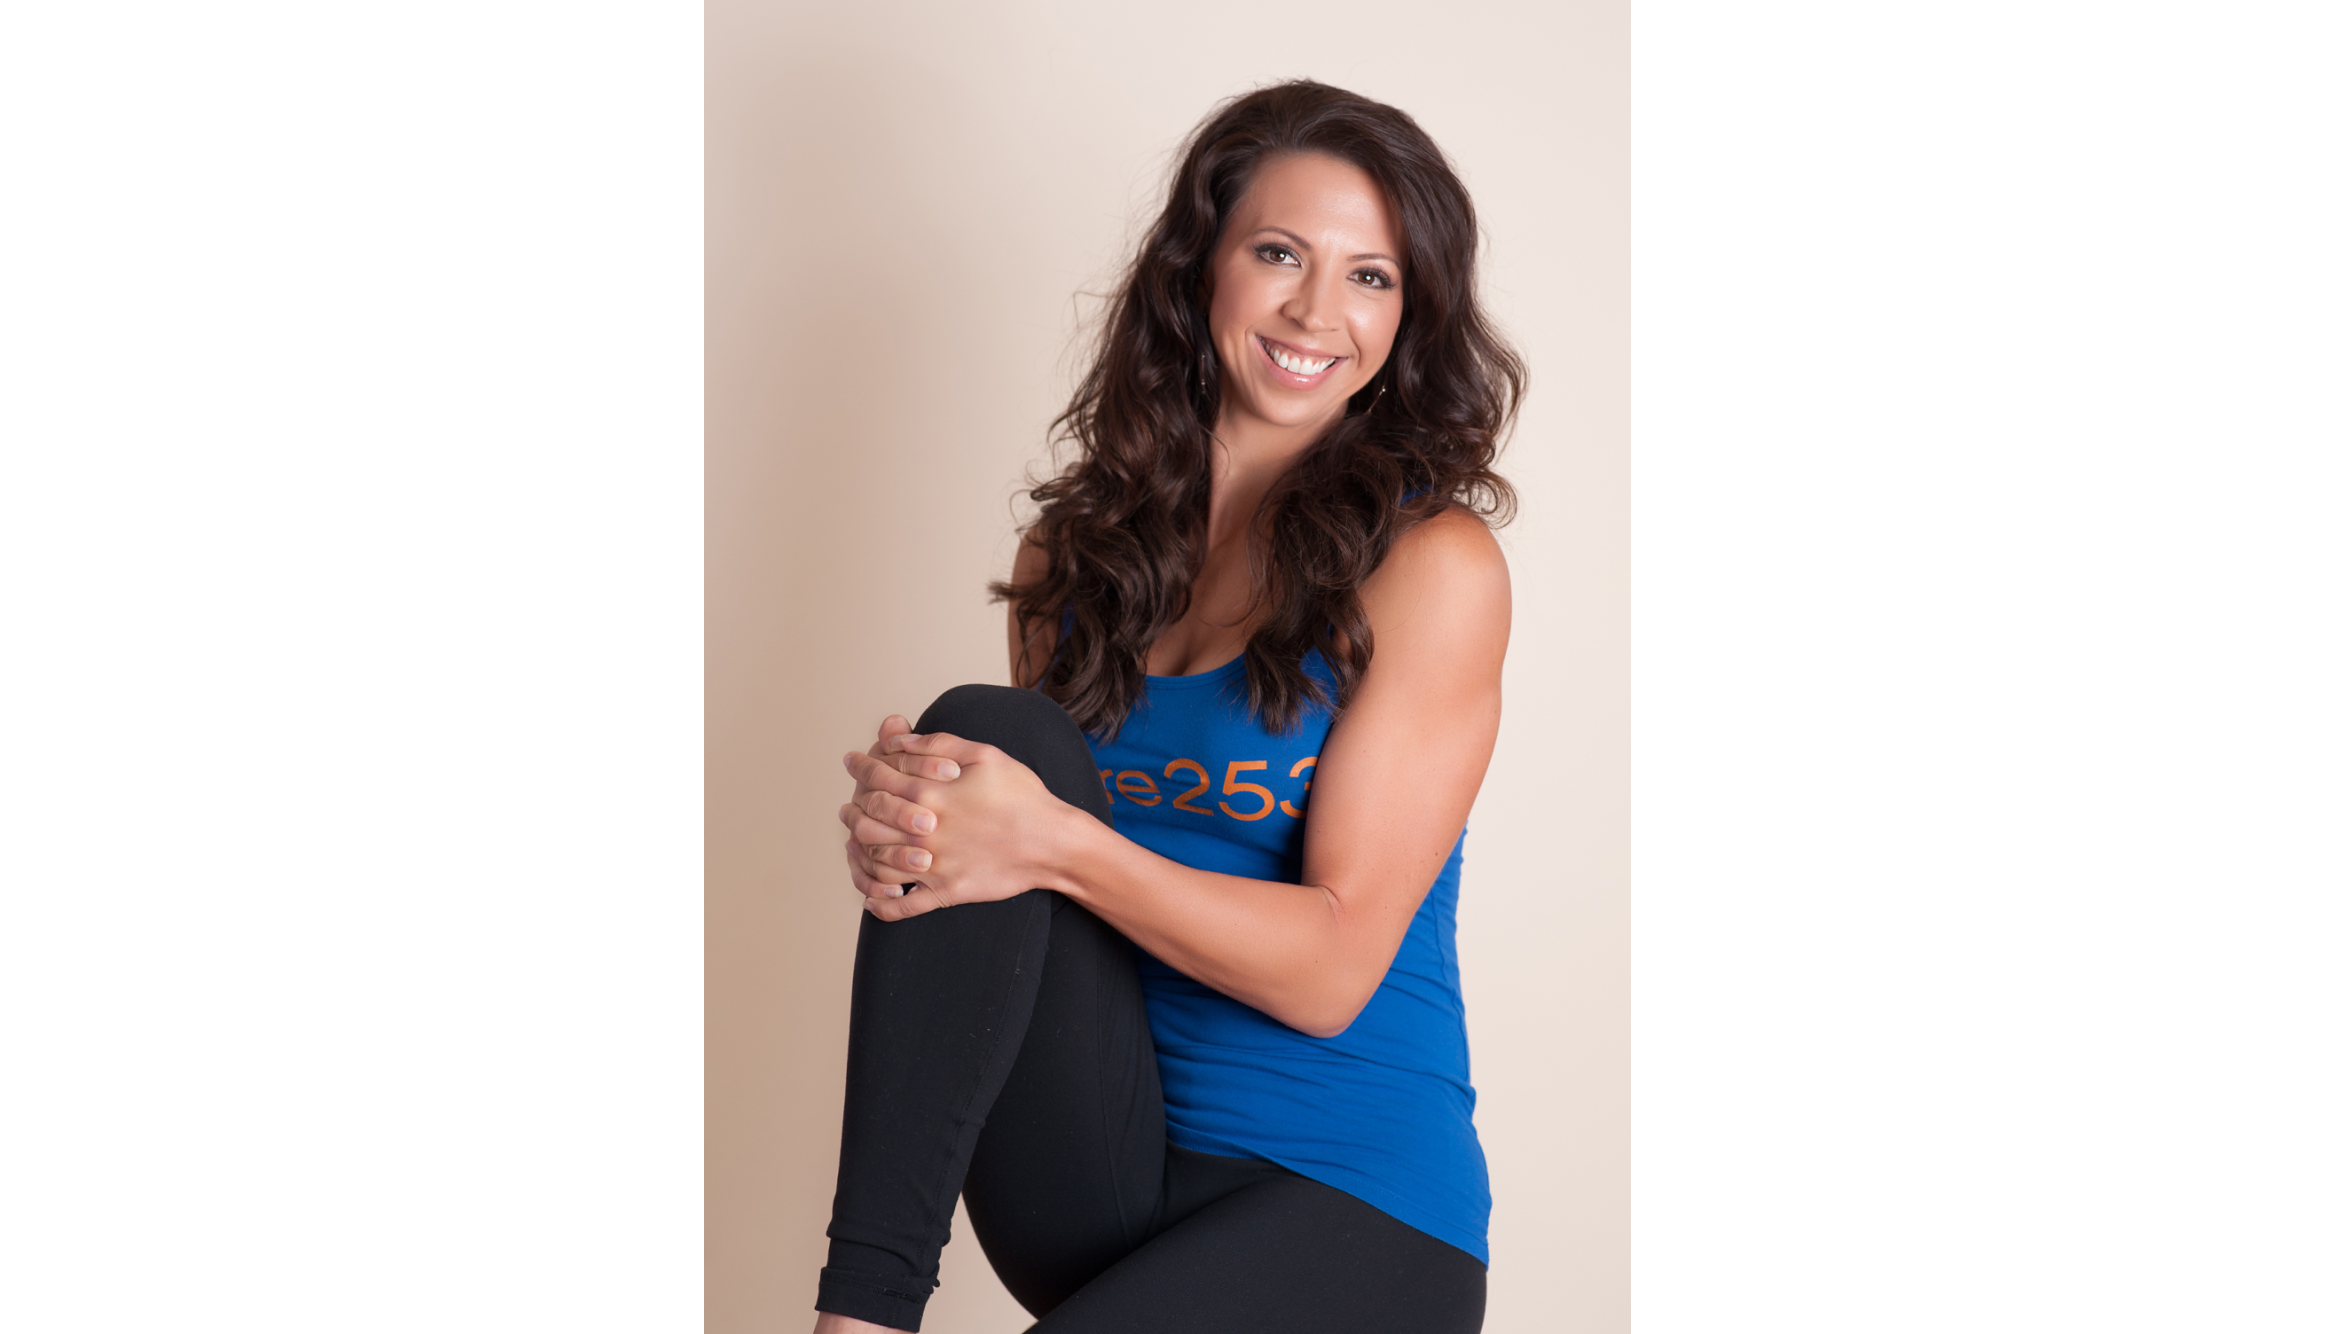 Athletic Pilates, Yoga, Strength & Fitness - The Fit Lab 253